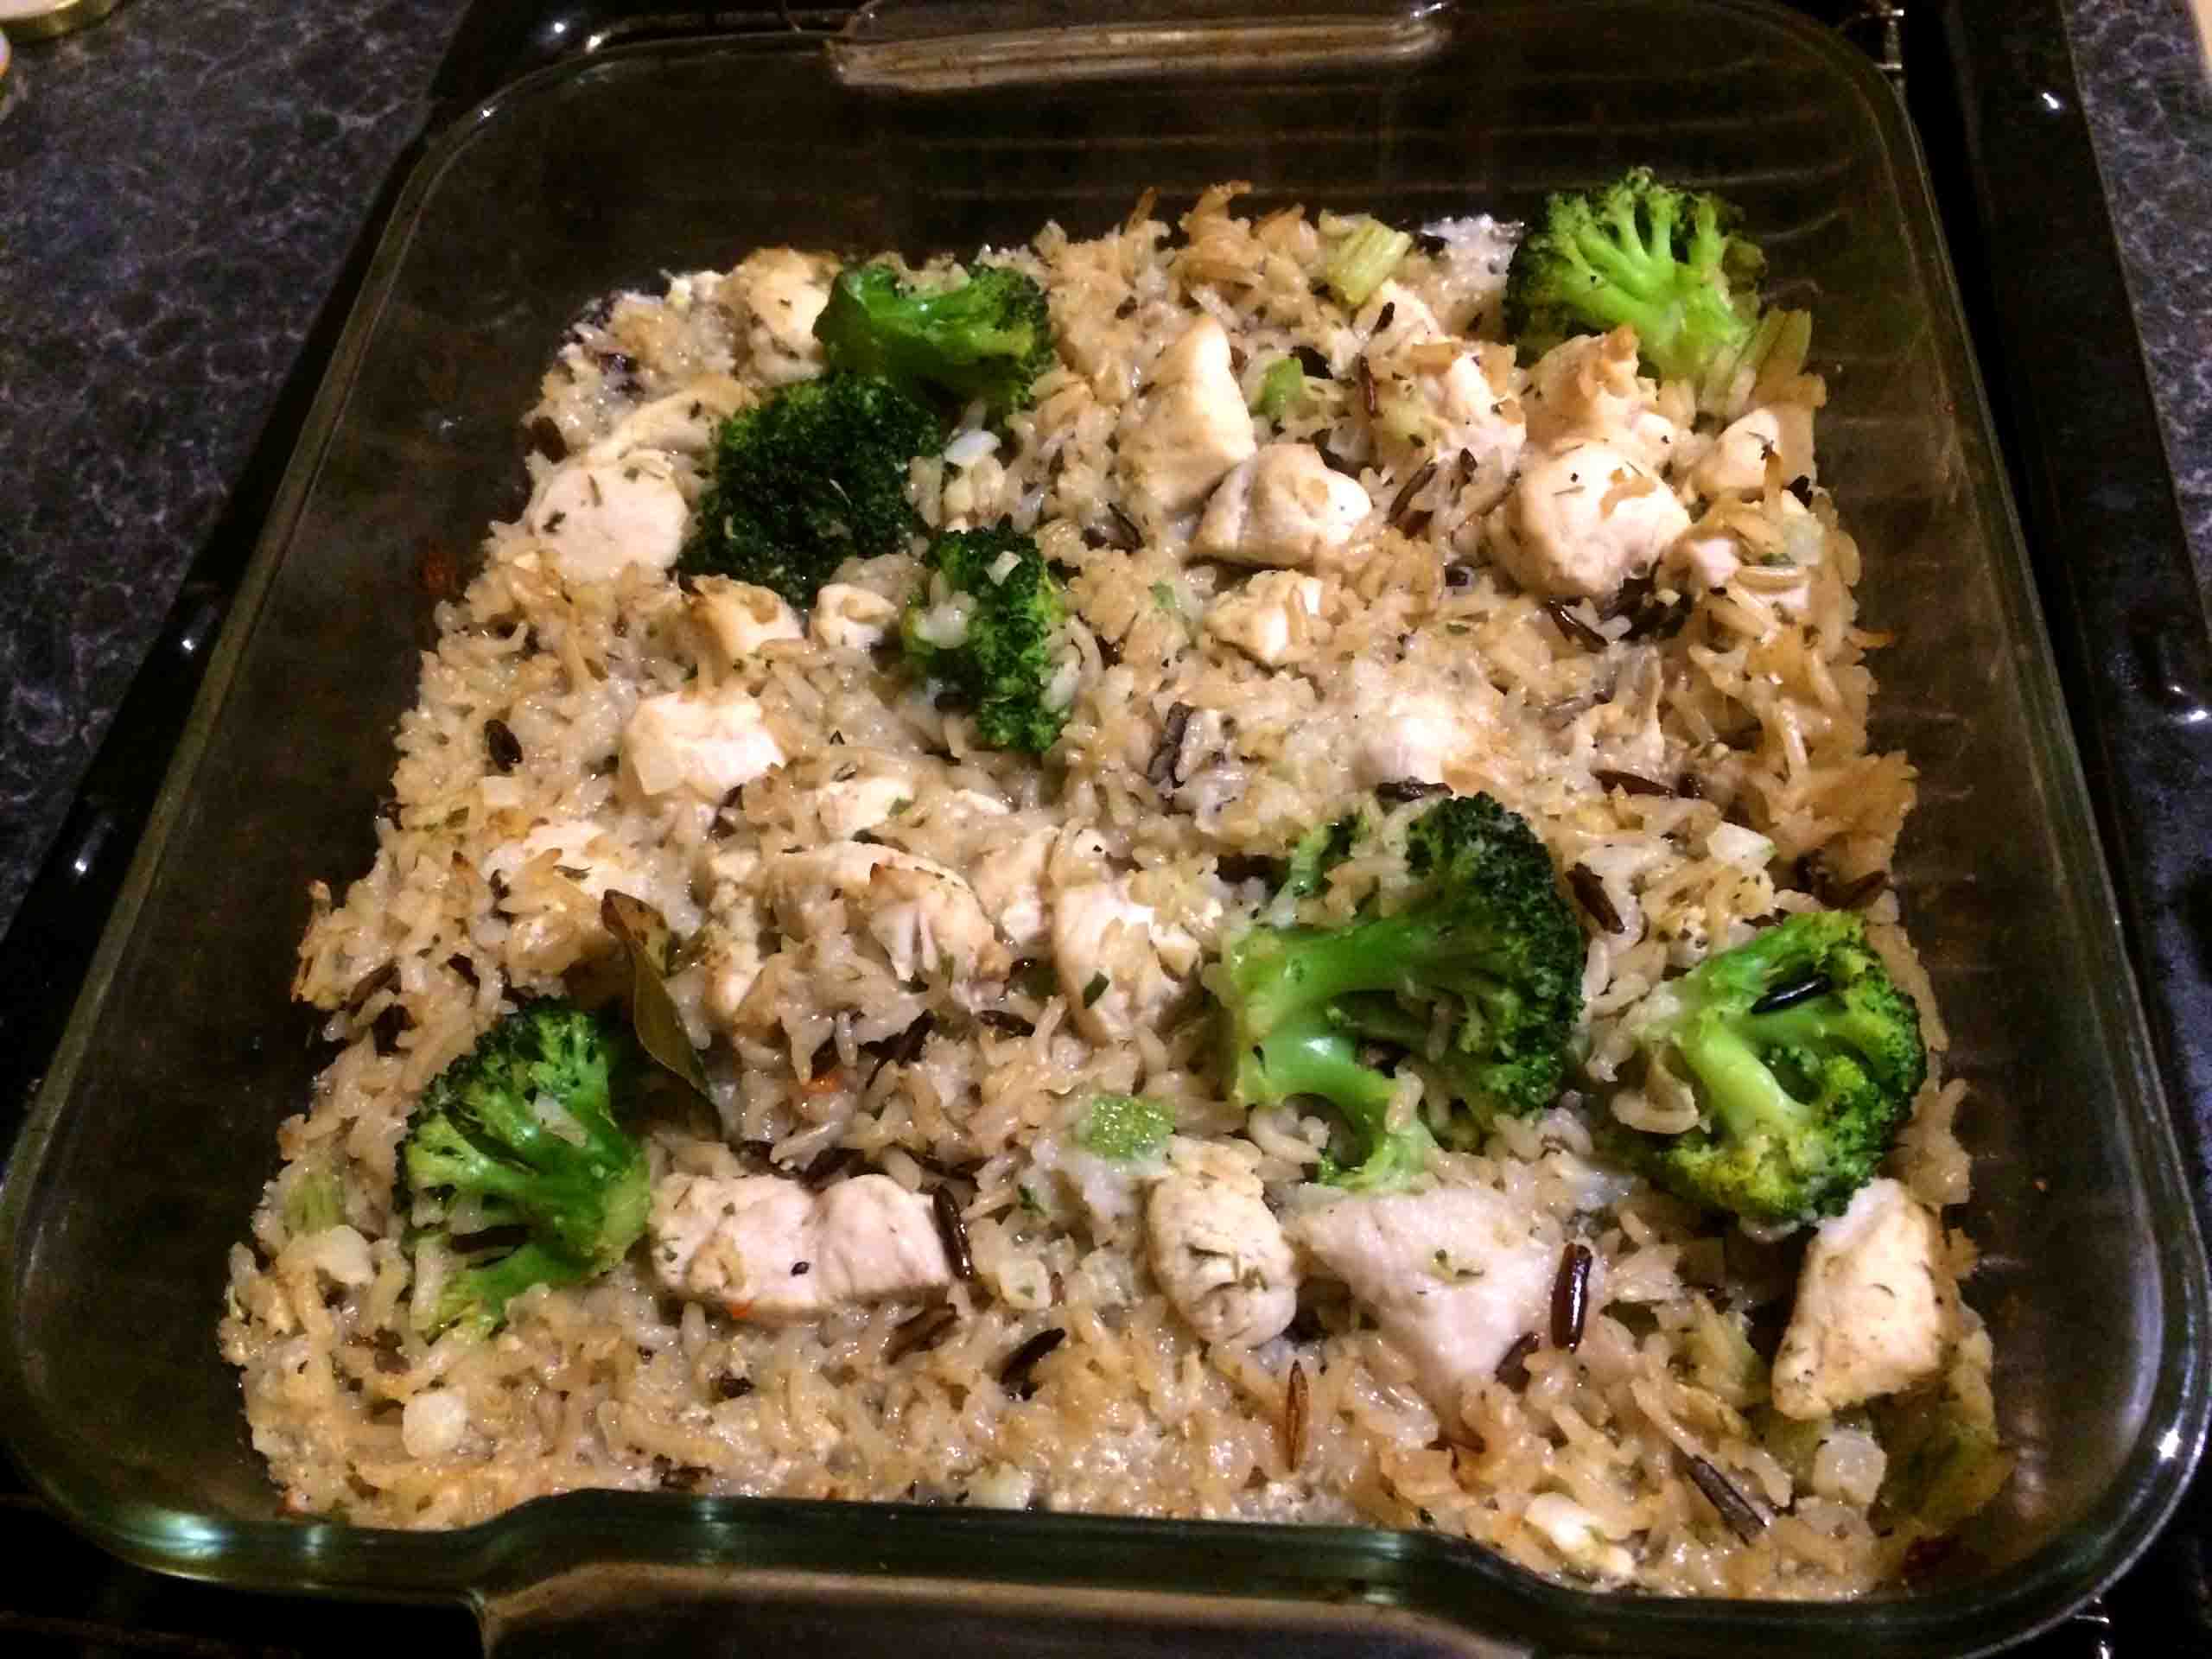 Photo of the roasting dish with chicken, wild rice, and broccoli.